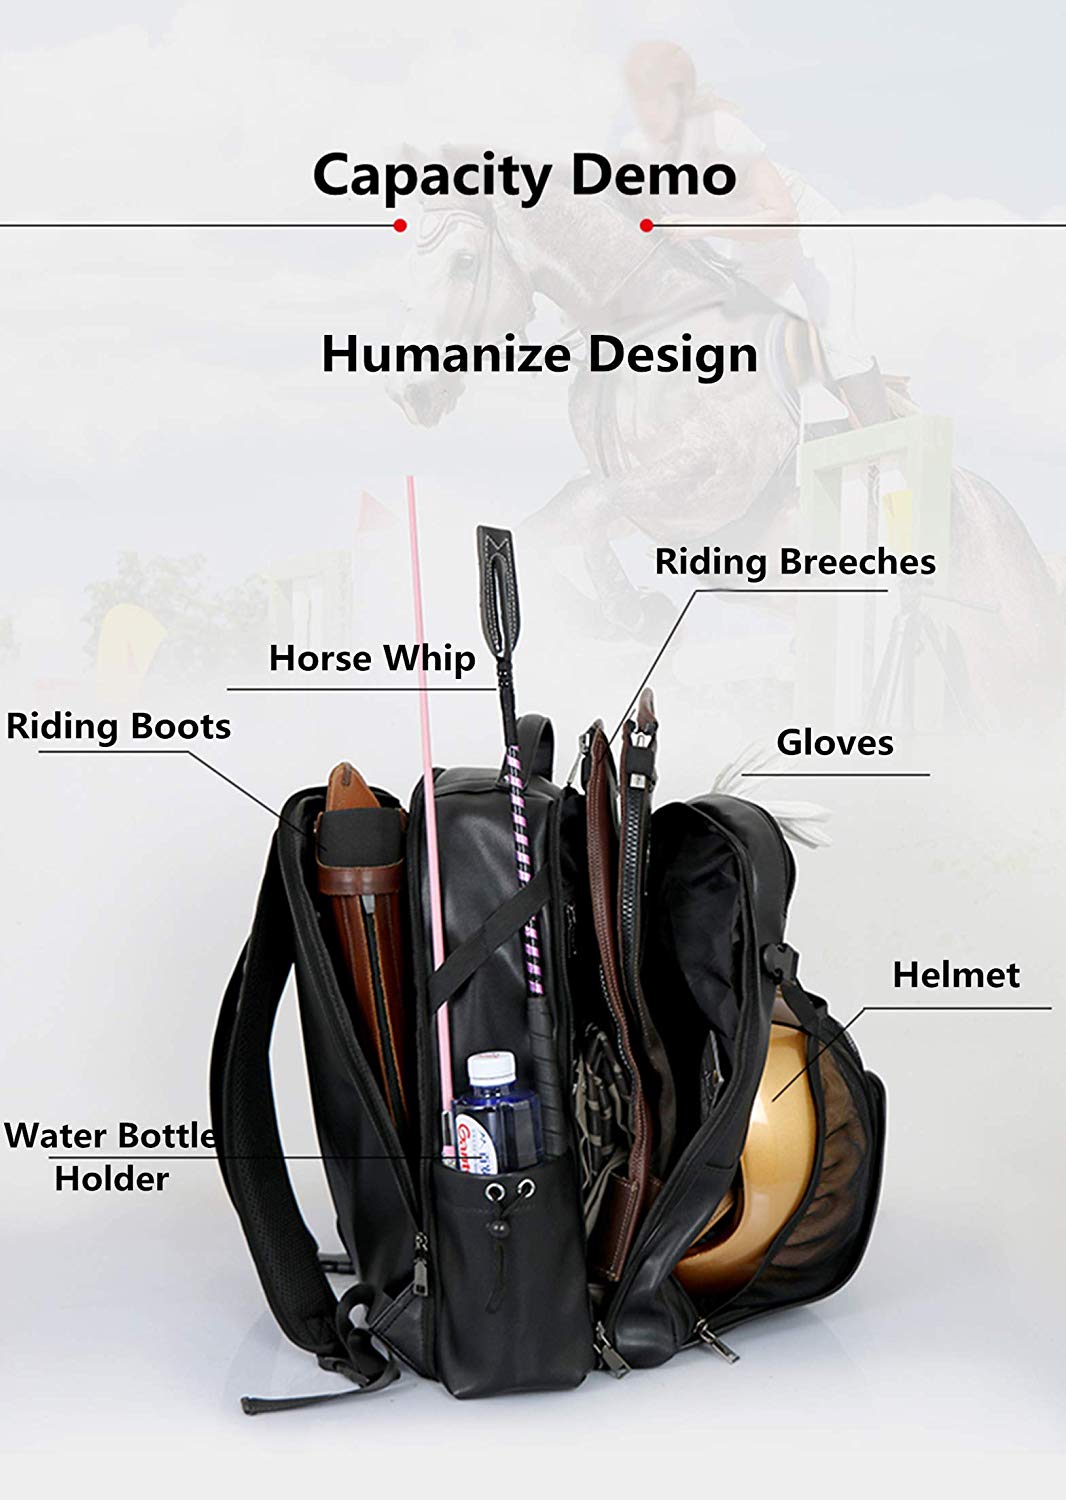 UNISTRENGH Professional Horse Riding Boots Carry Bag Waterproof Equestrian Horse Riding Bag with Helmet Compartment